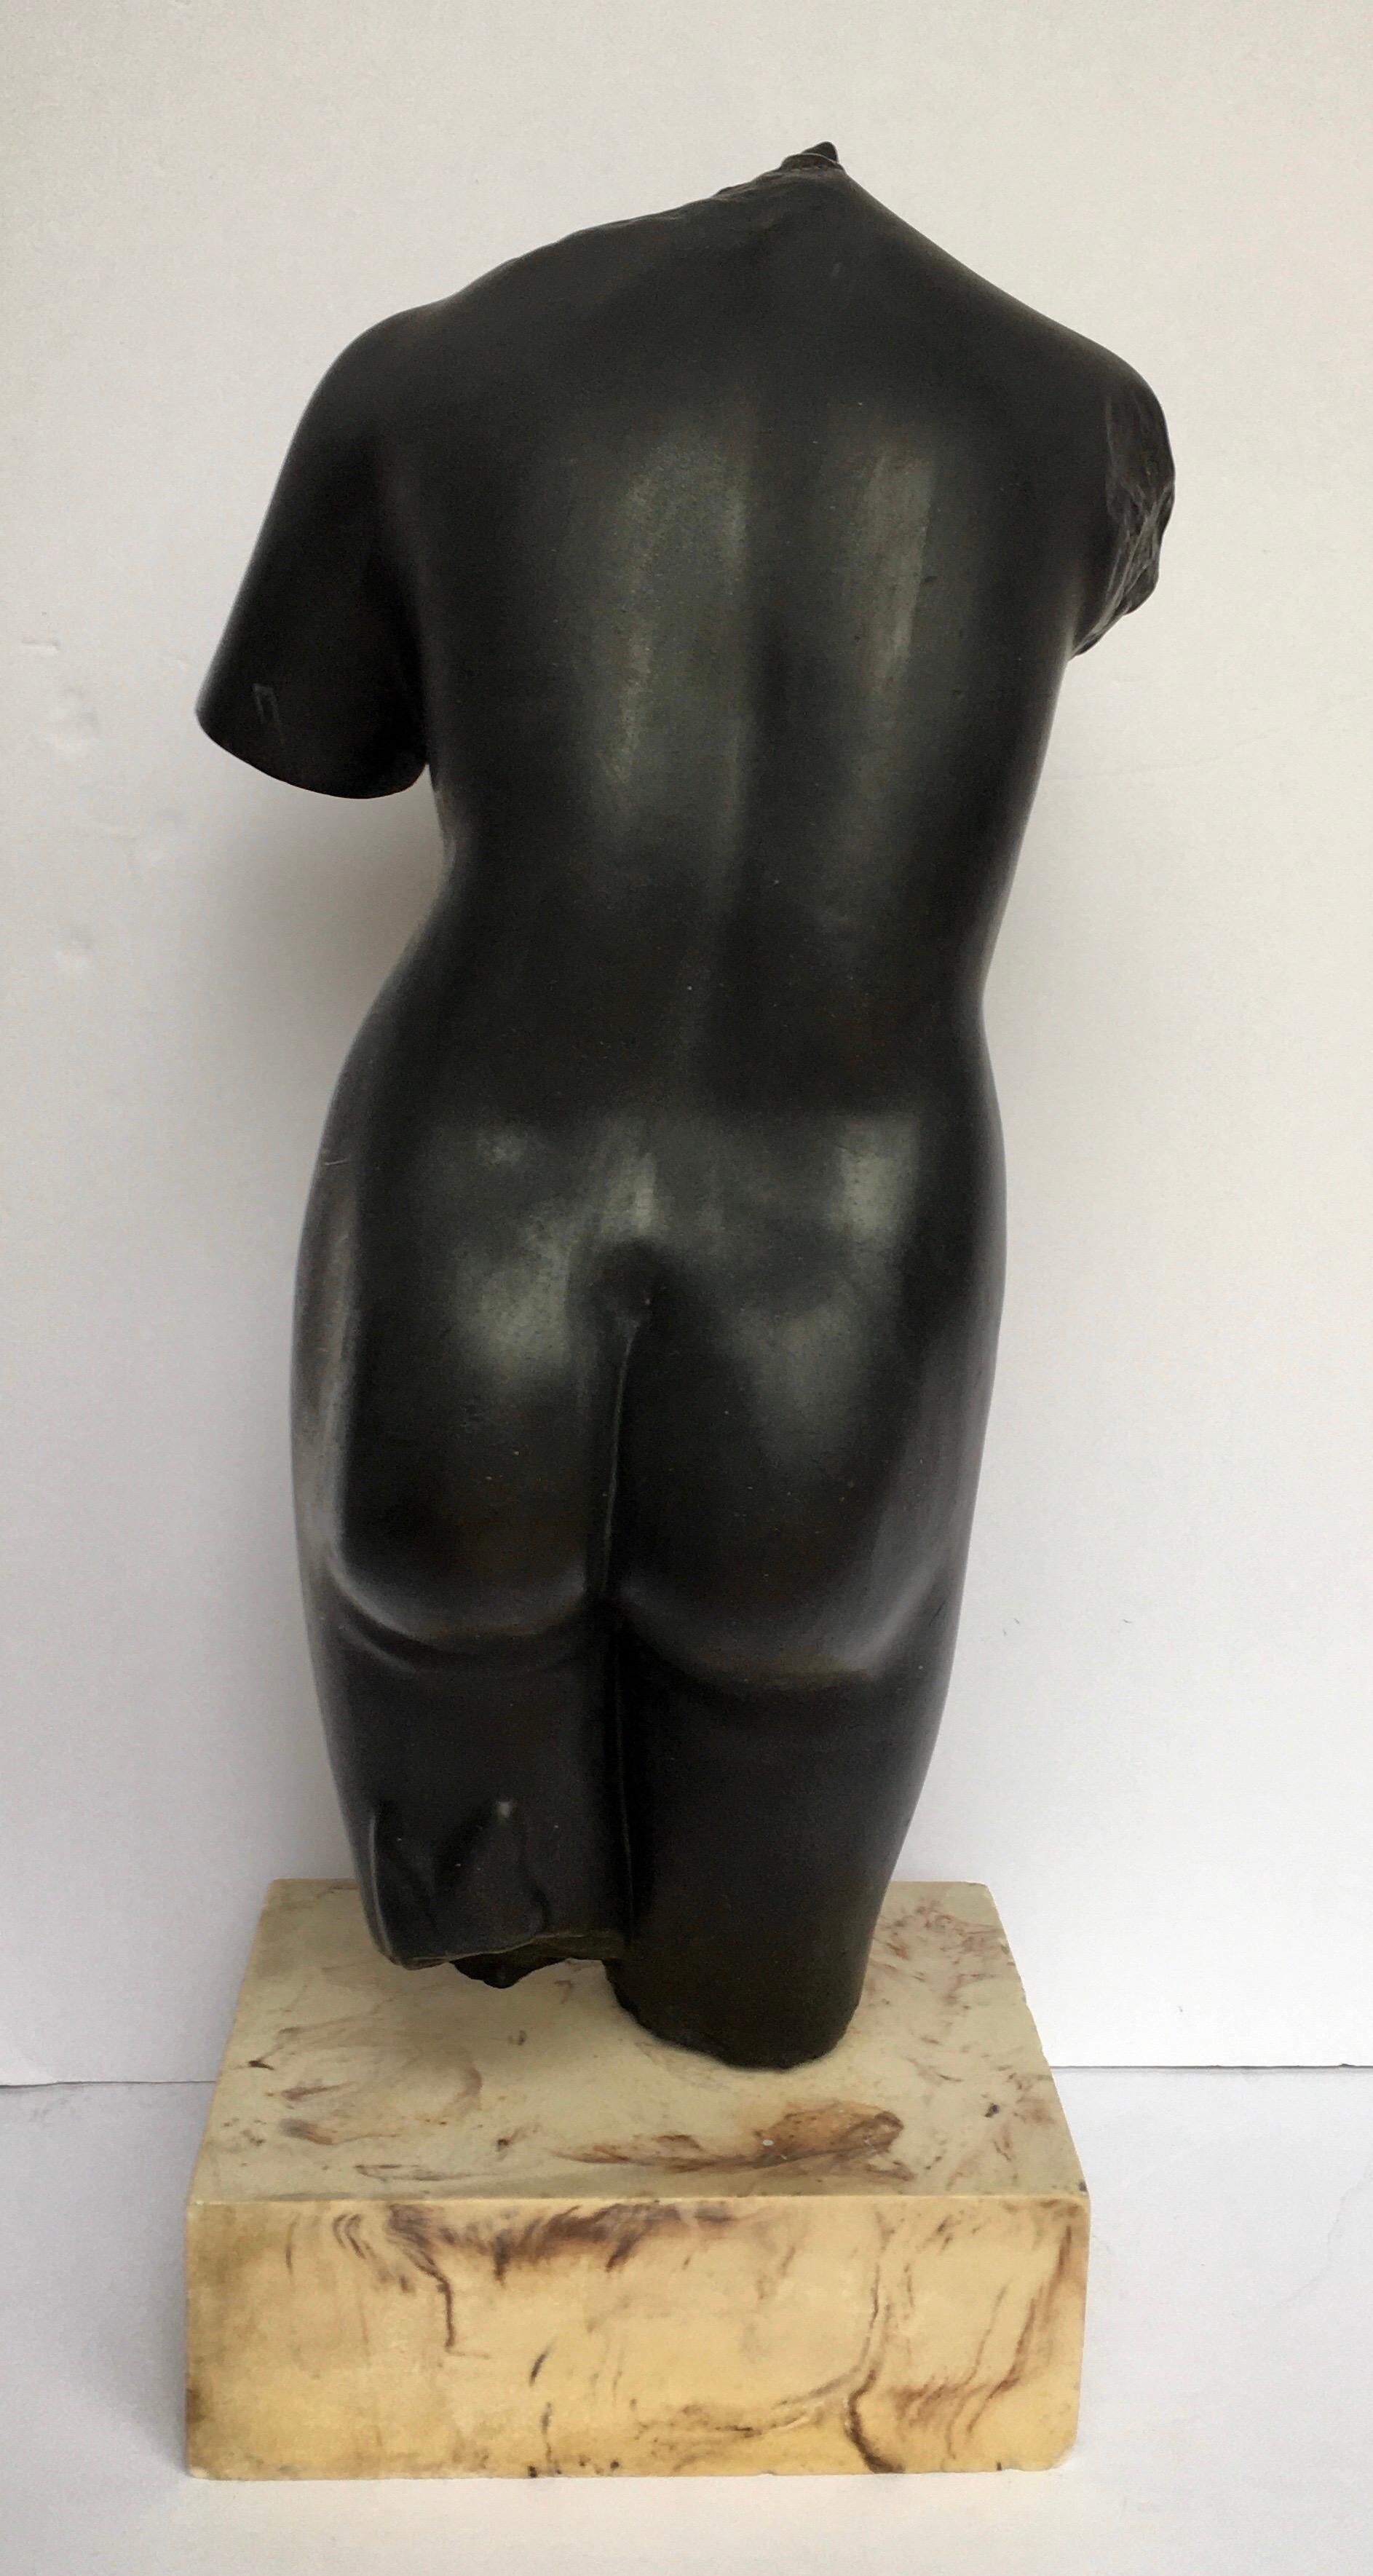 Composition Mid-Century Modern Plaster and Marble Female Torso Bust Sculpture, 1970s